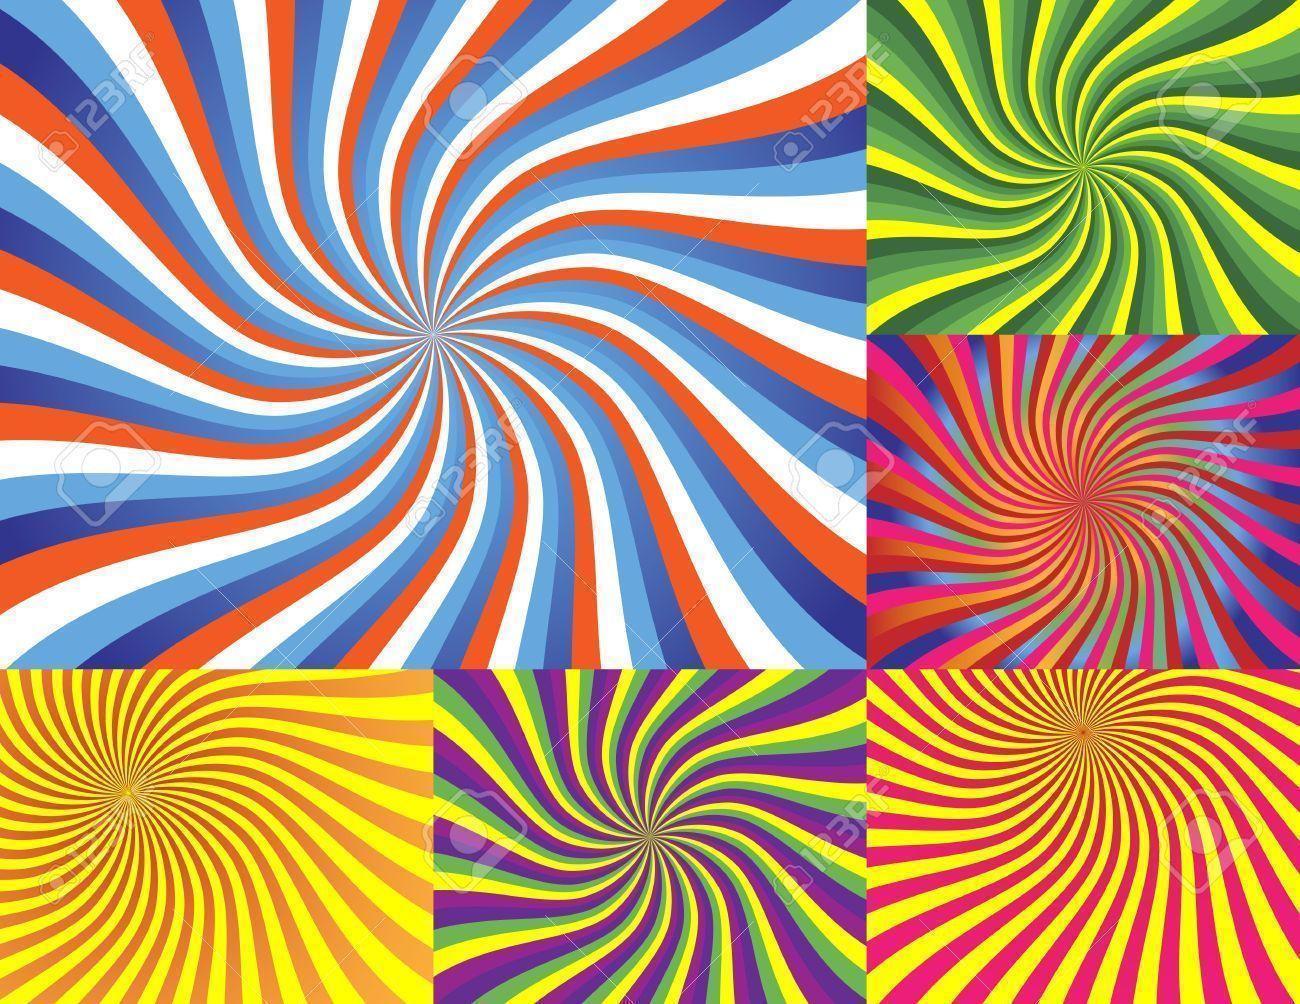 Very Colorful Wave Background Royalty Free Clipart, Vectors